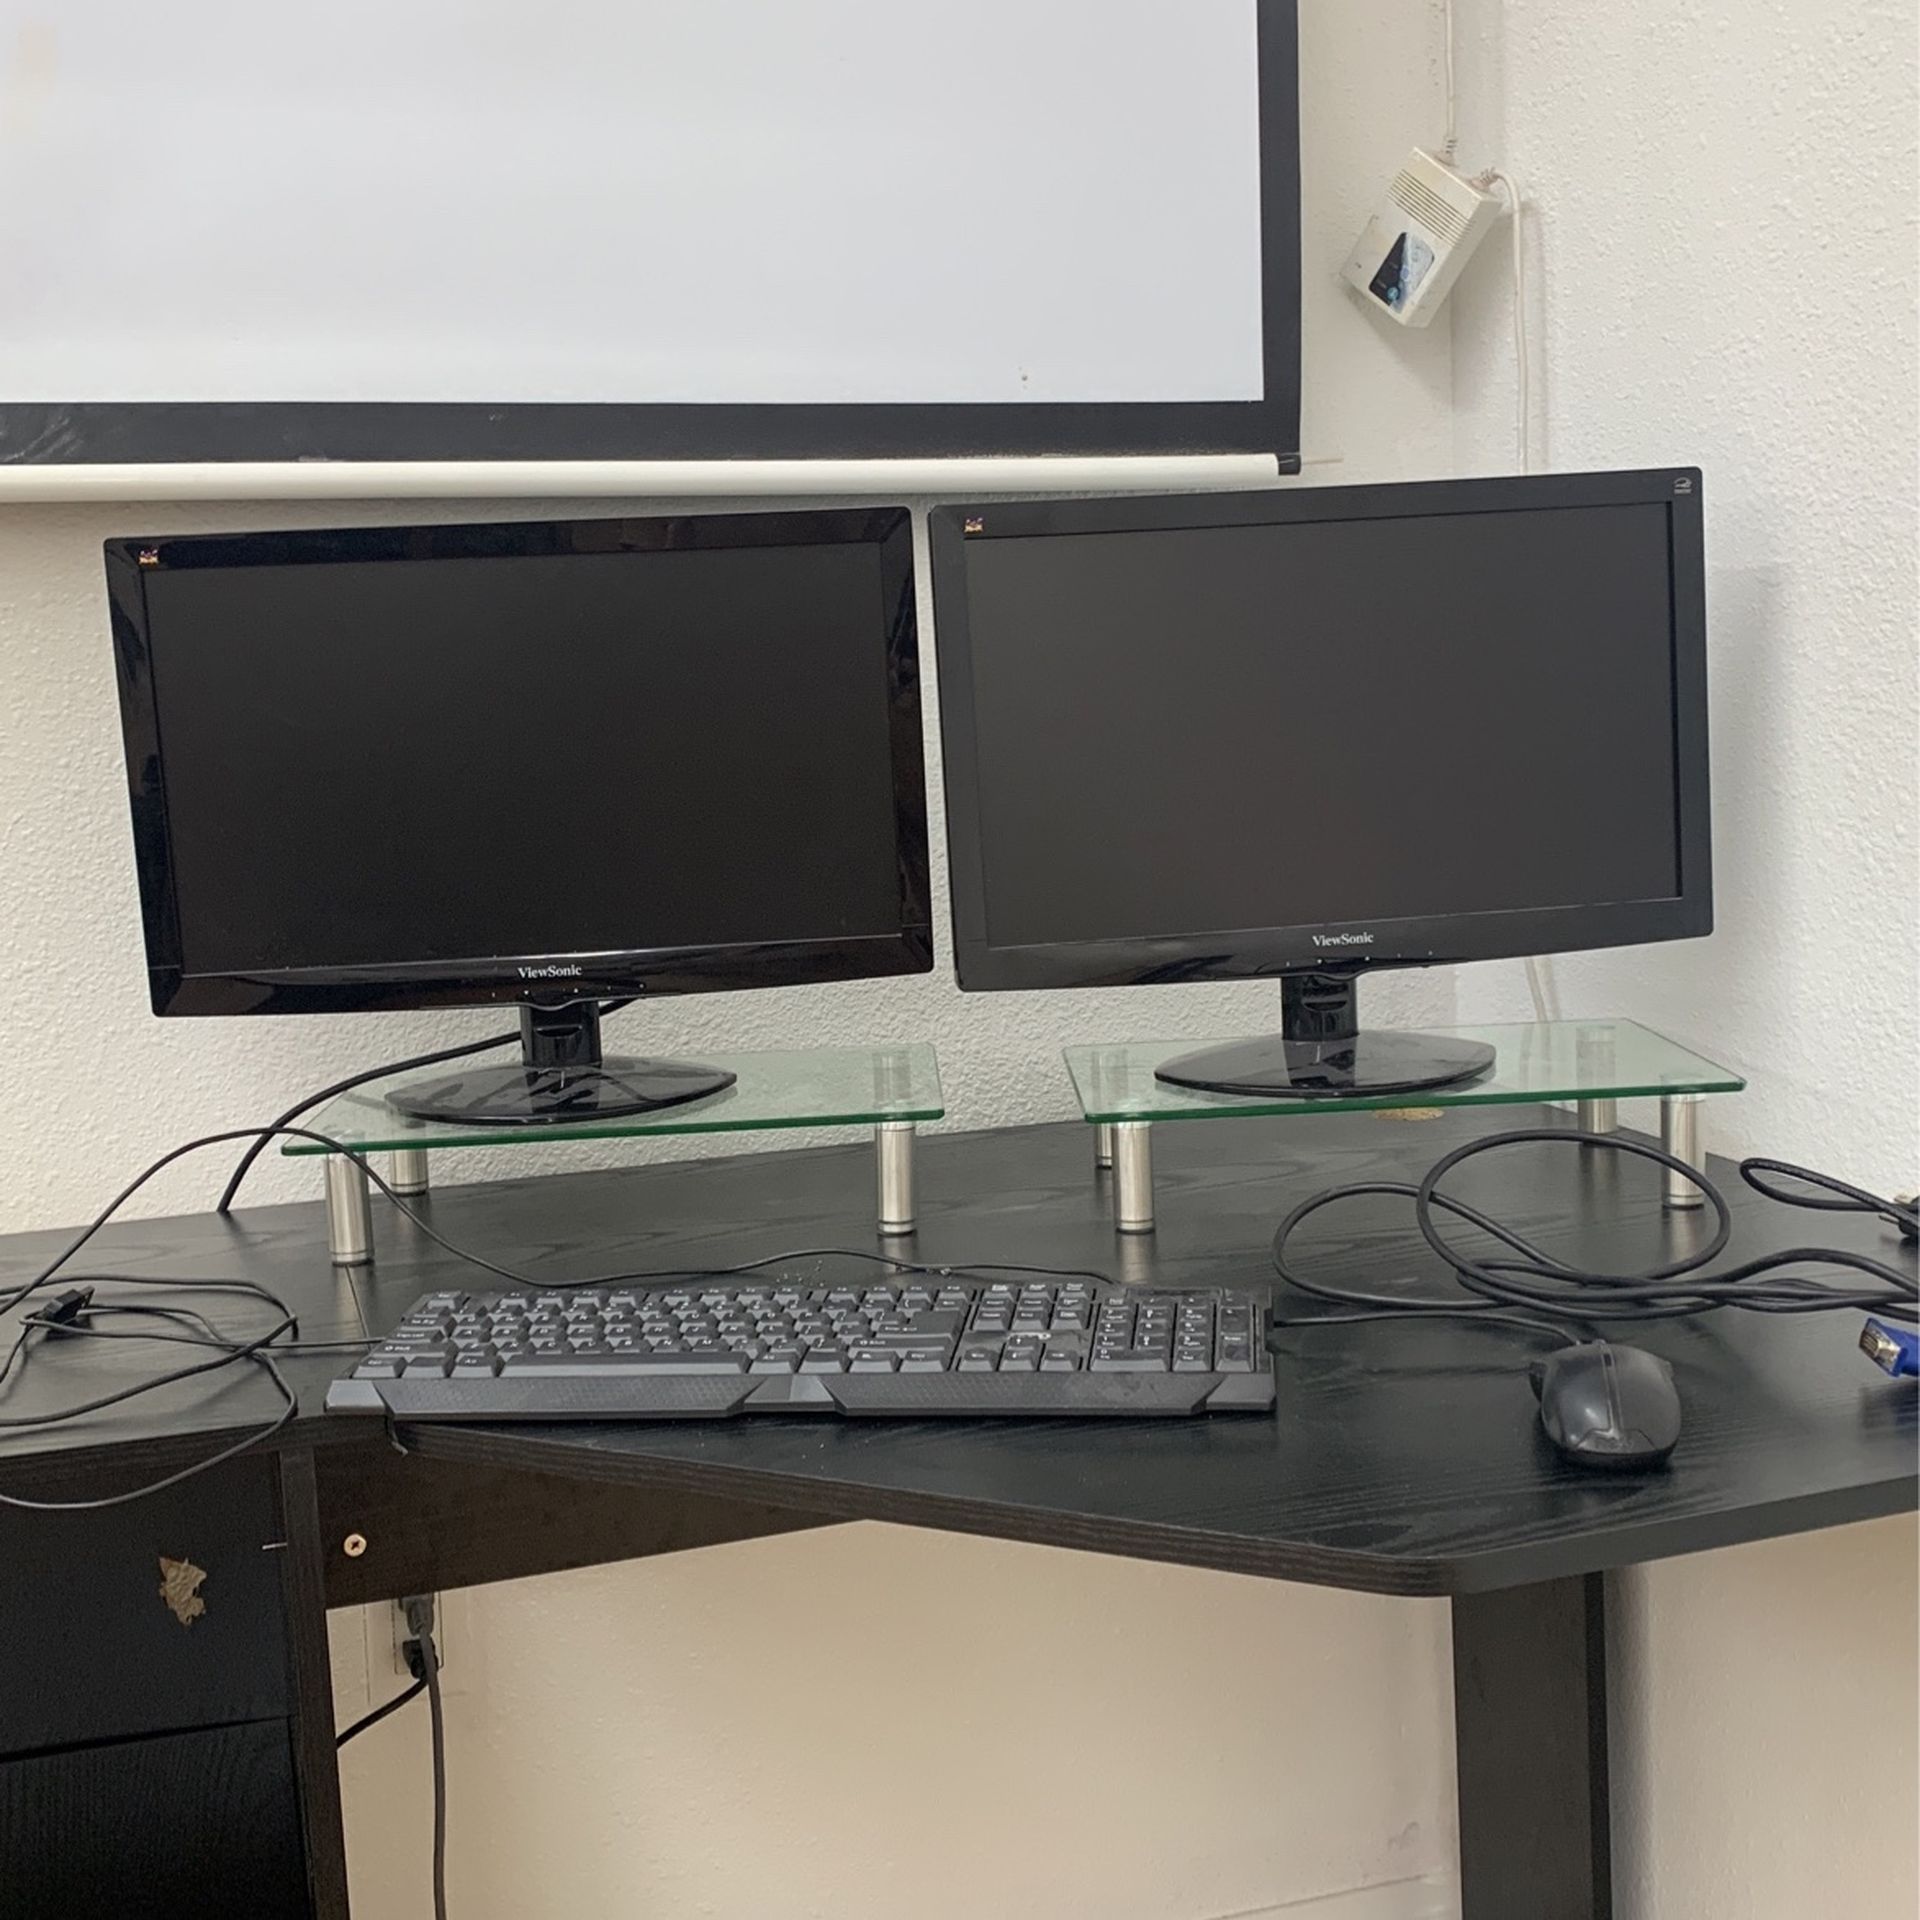 Computer Displays With Mouse And Keyboard